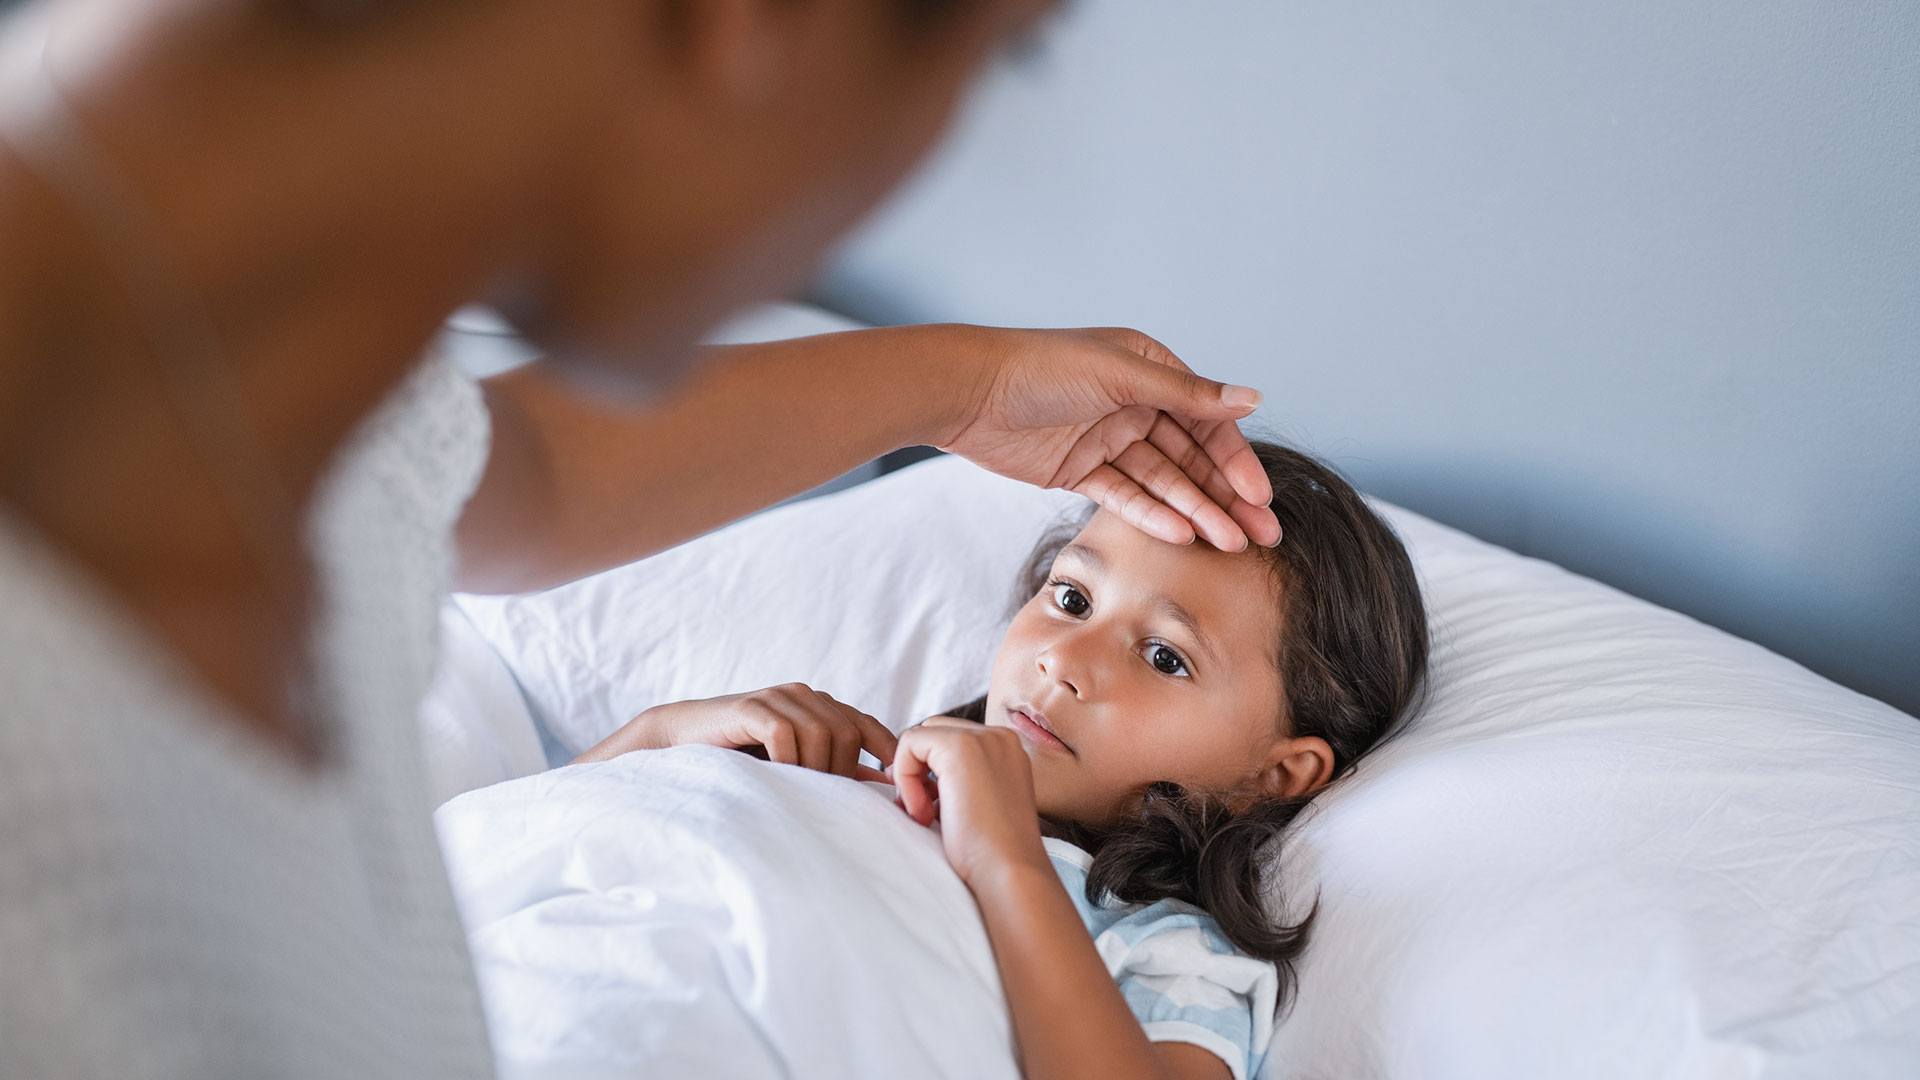 Child’s Fever: When You Should Go to ER